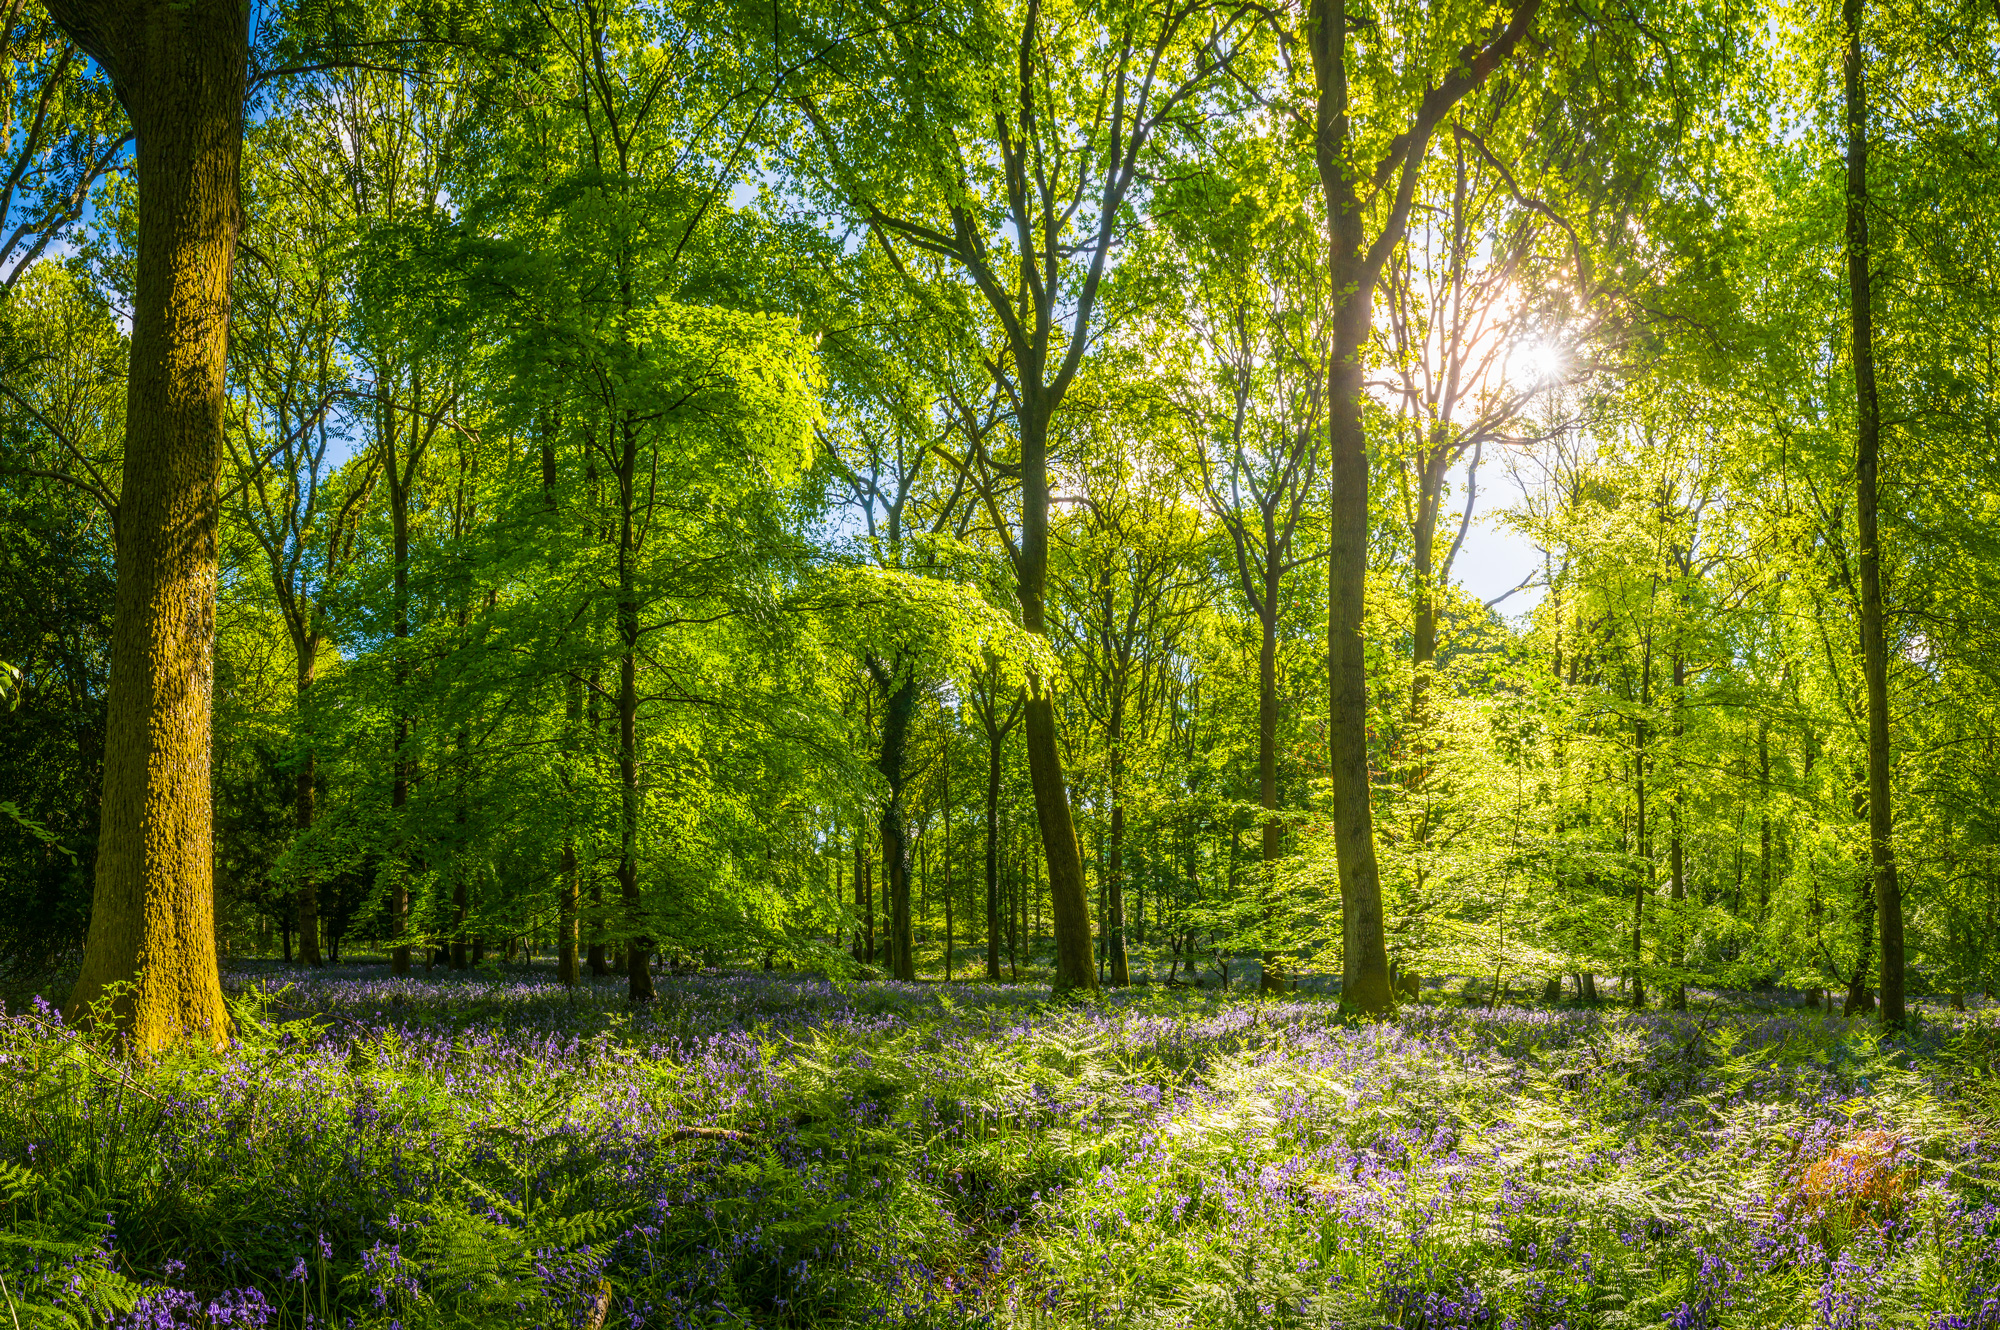 hardwood forest in the spring with flowers in bloom